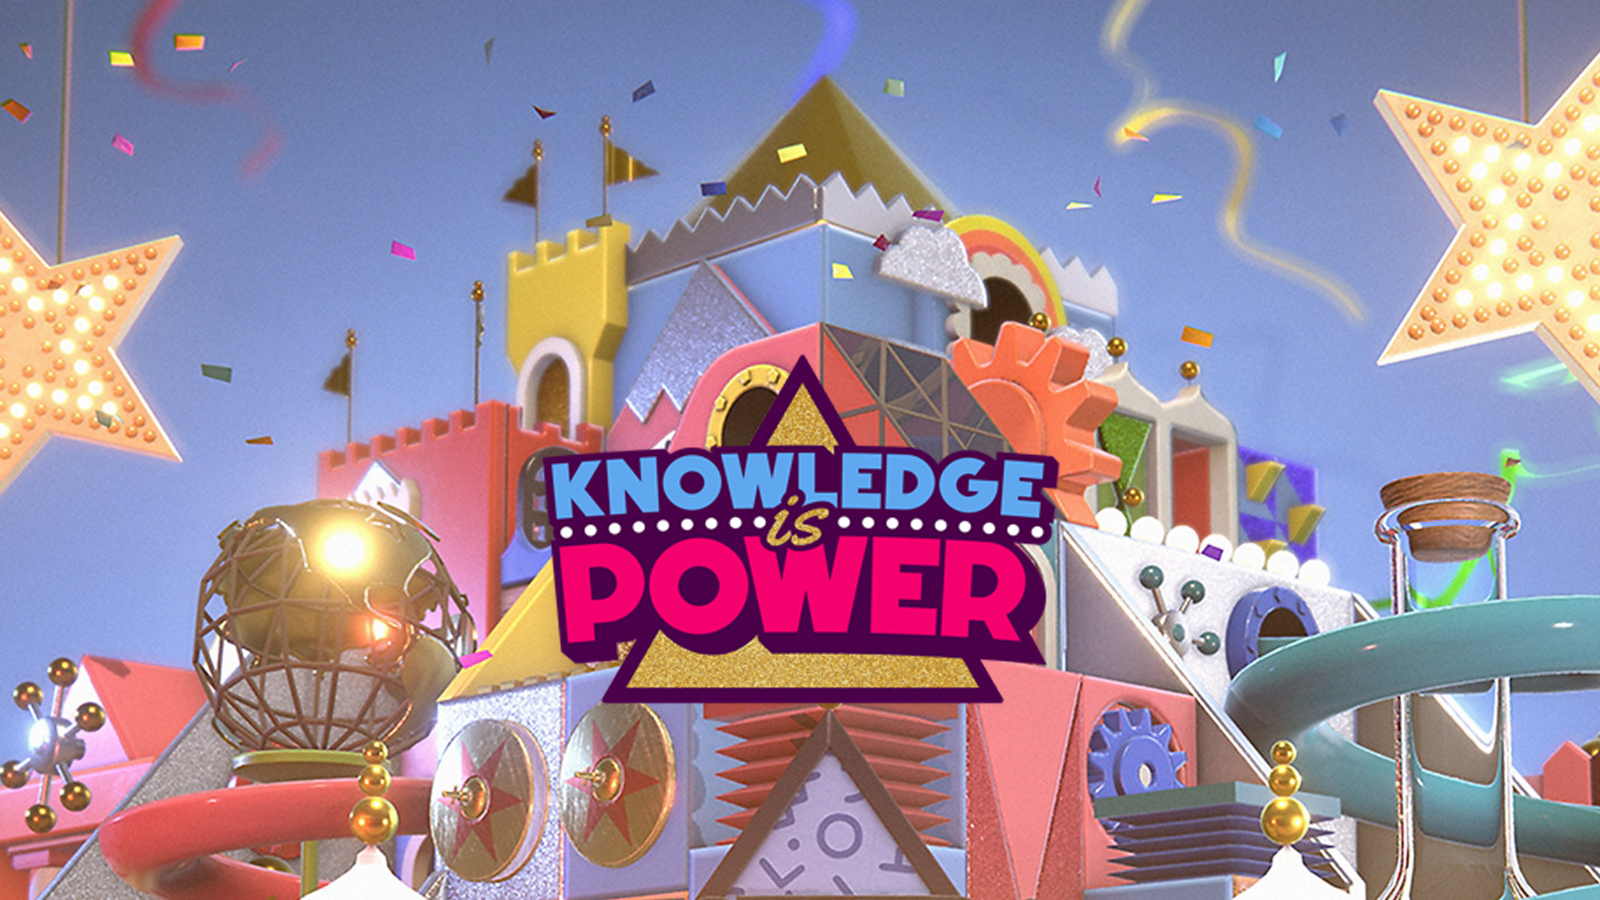 knowledge is power playstation 4